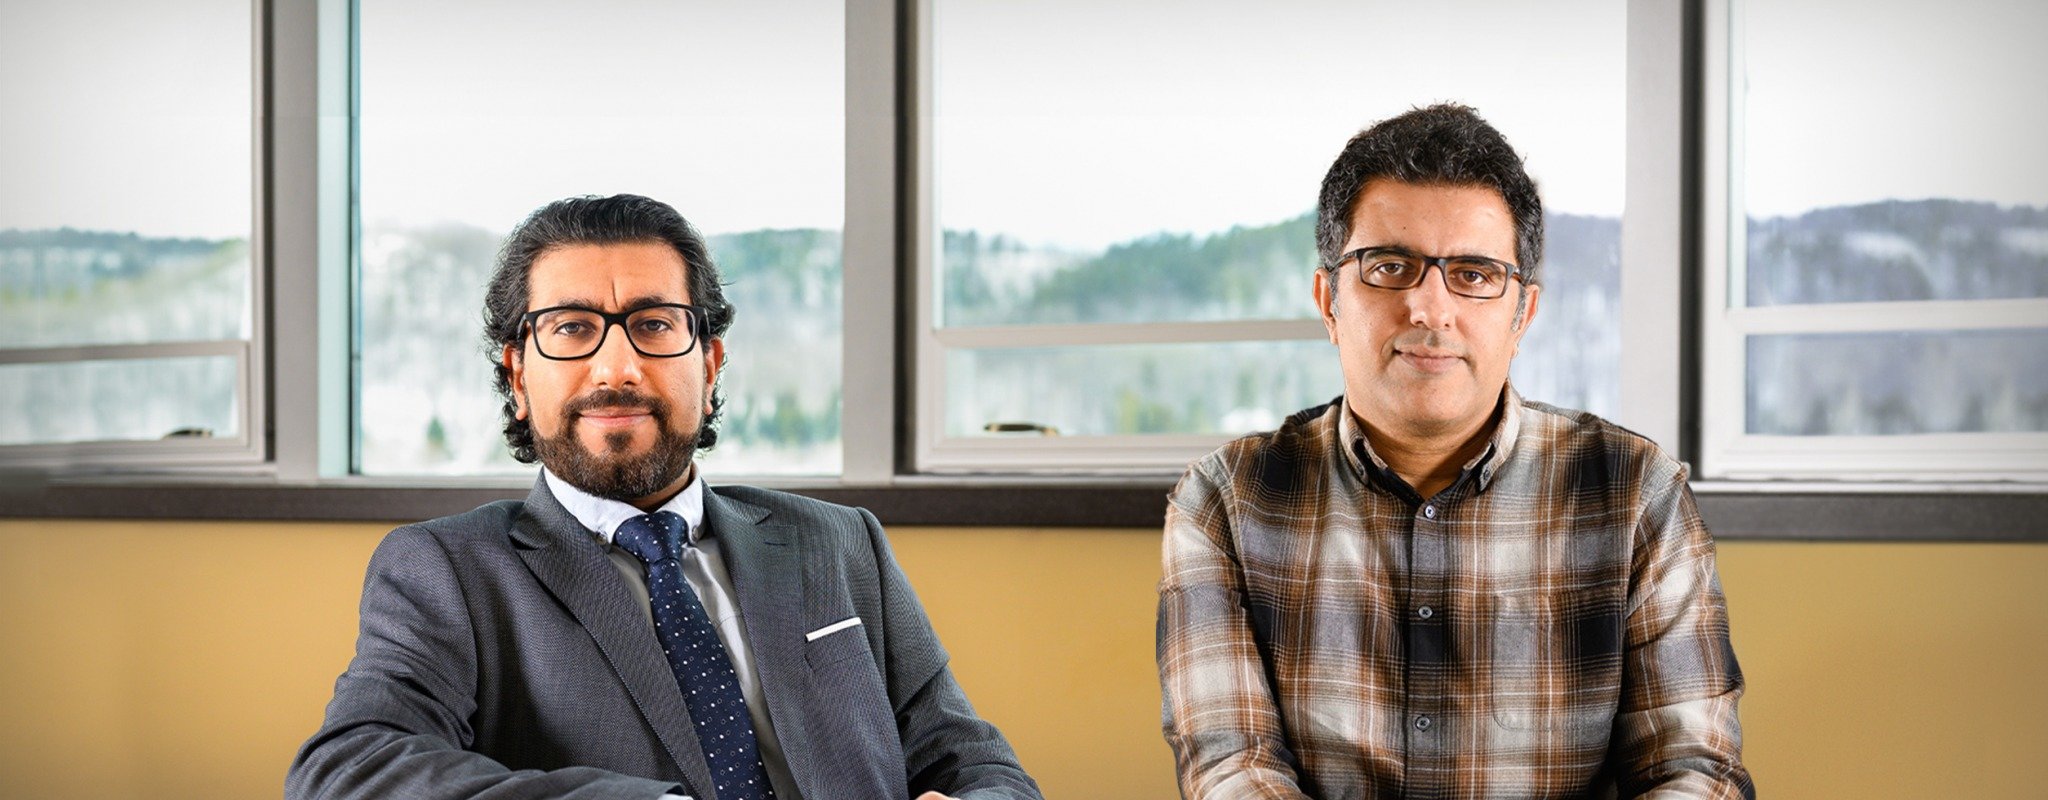 Dr. Hassan Masoud and Dr. Radwin Asgari sit together as CAREER Award Winners with the beautiful and snowy Houghton valley in the windows behind them.